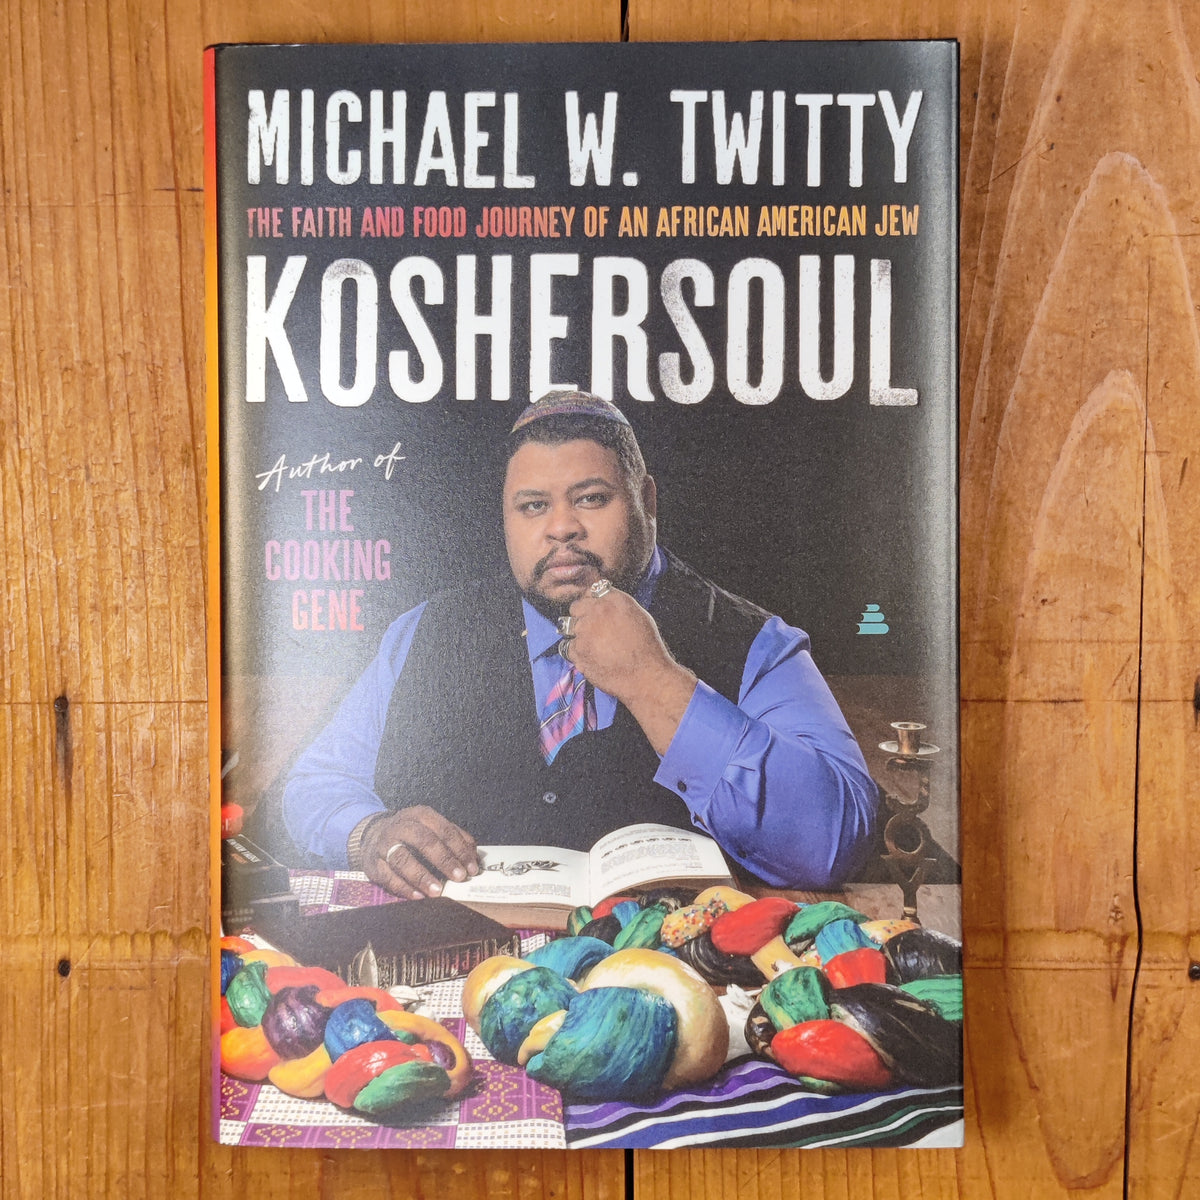 Koshersoul: The Faith and Food Journey of an African American Jew - Michael Twitty